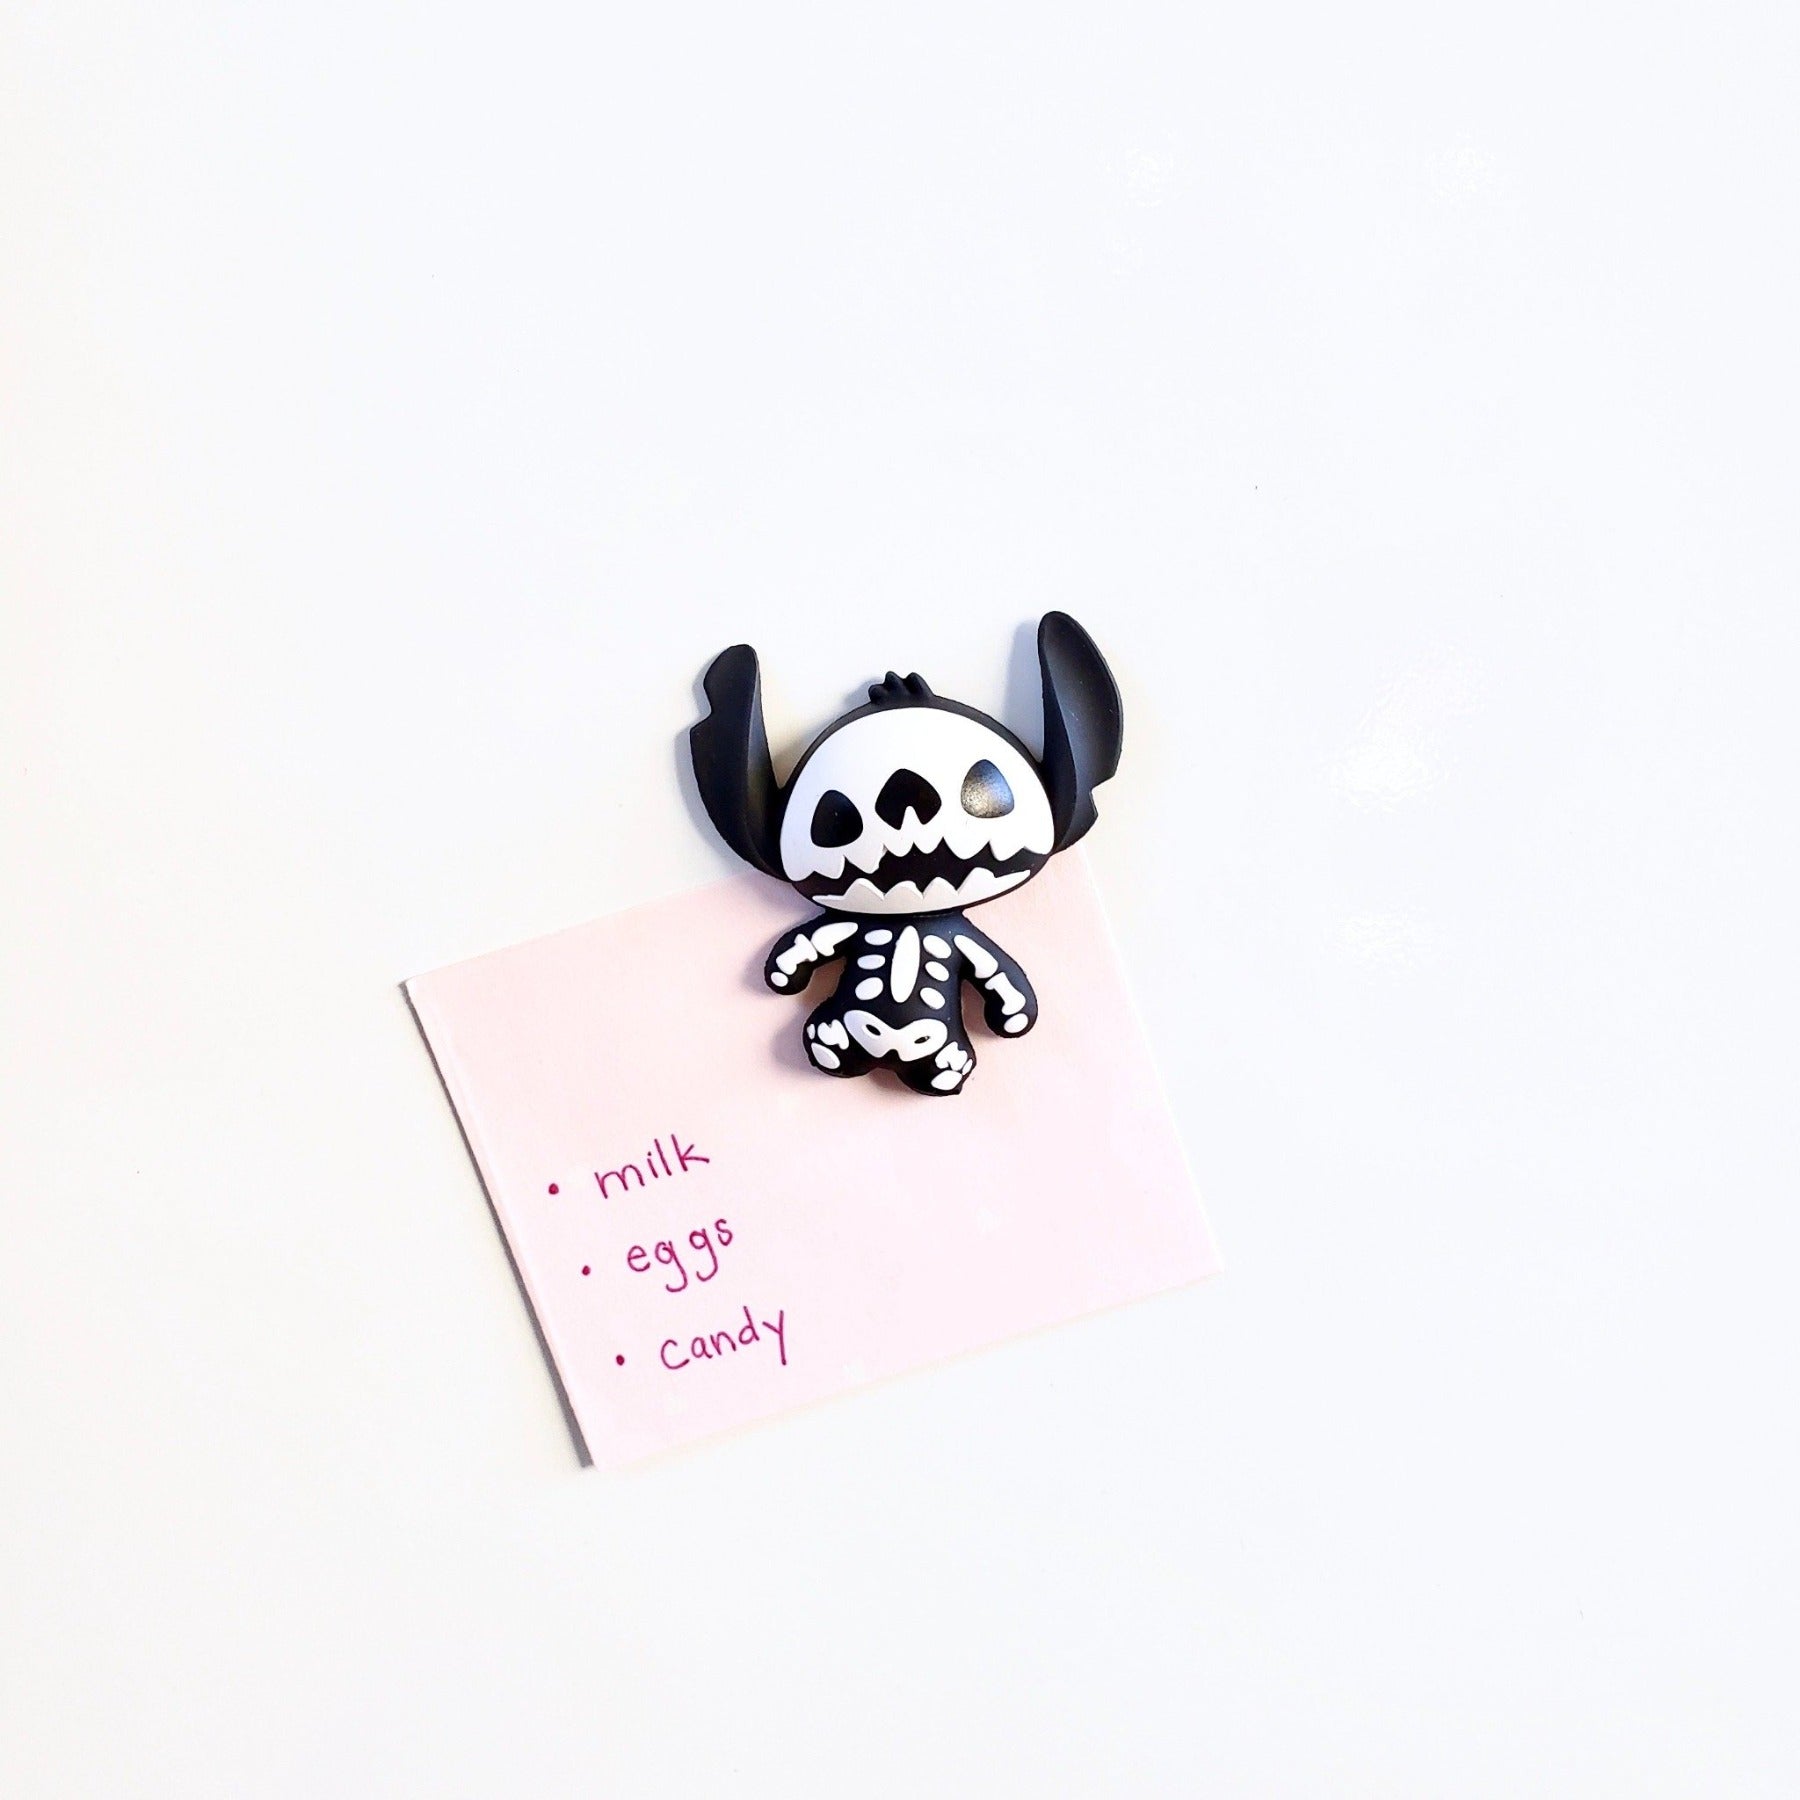 shopping list hung on magnetic surface with Disney Stitch Skeleton 3D vinyl figure magnet